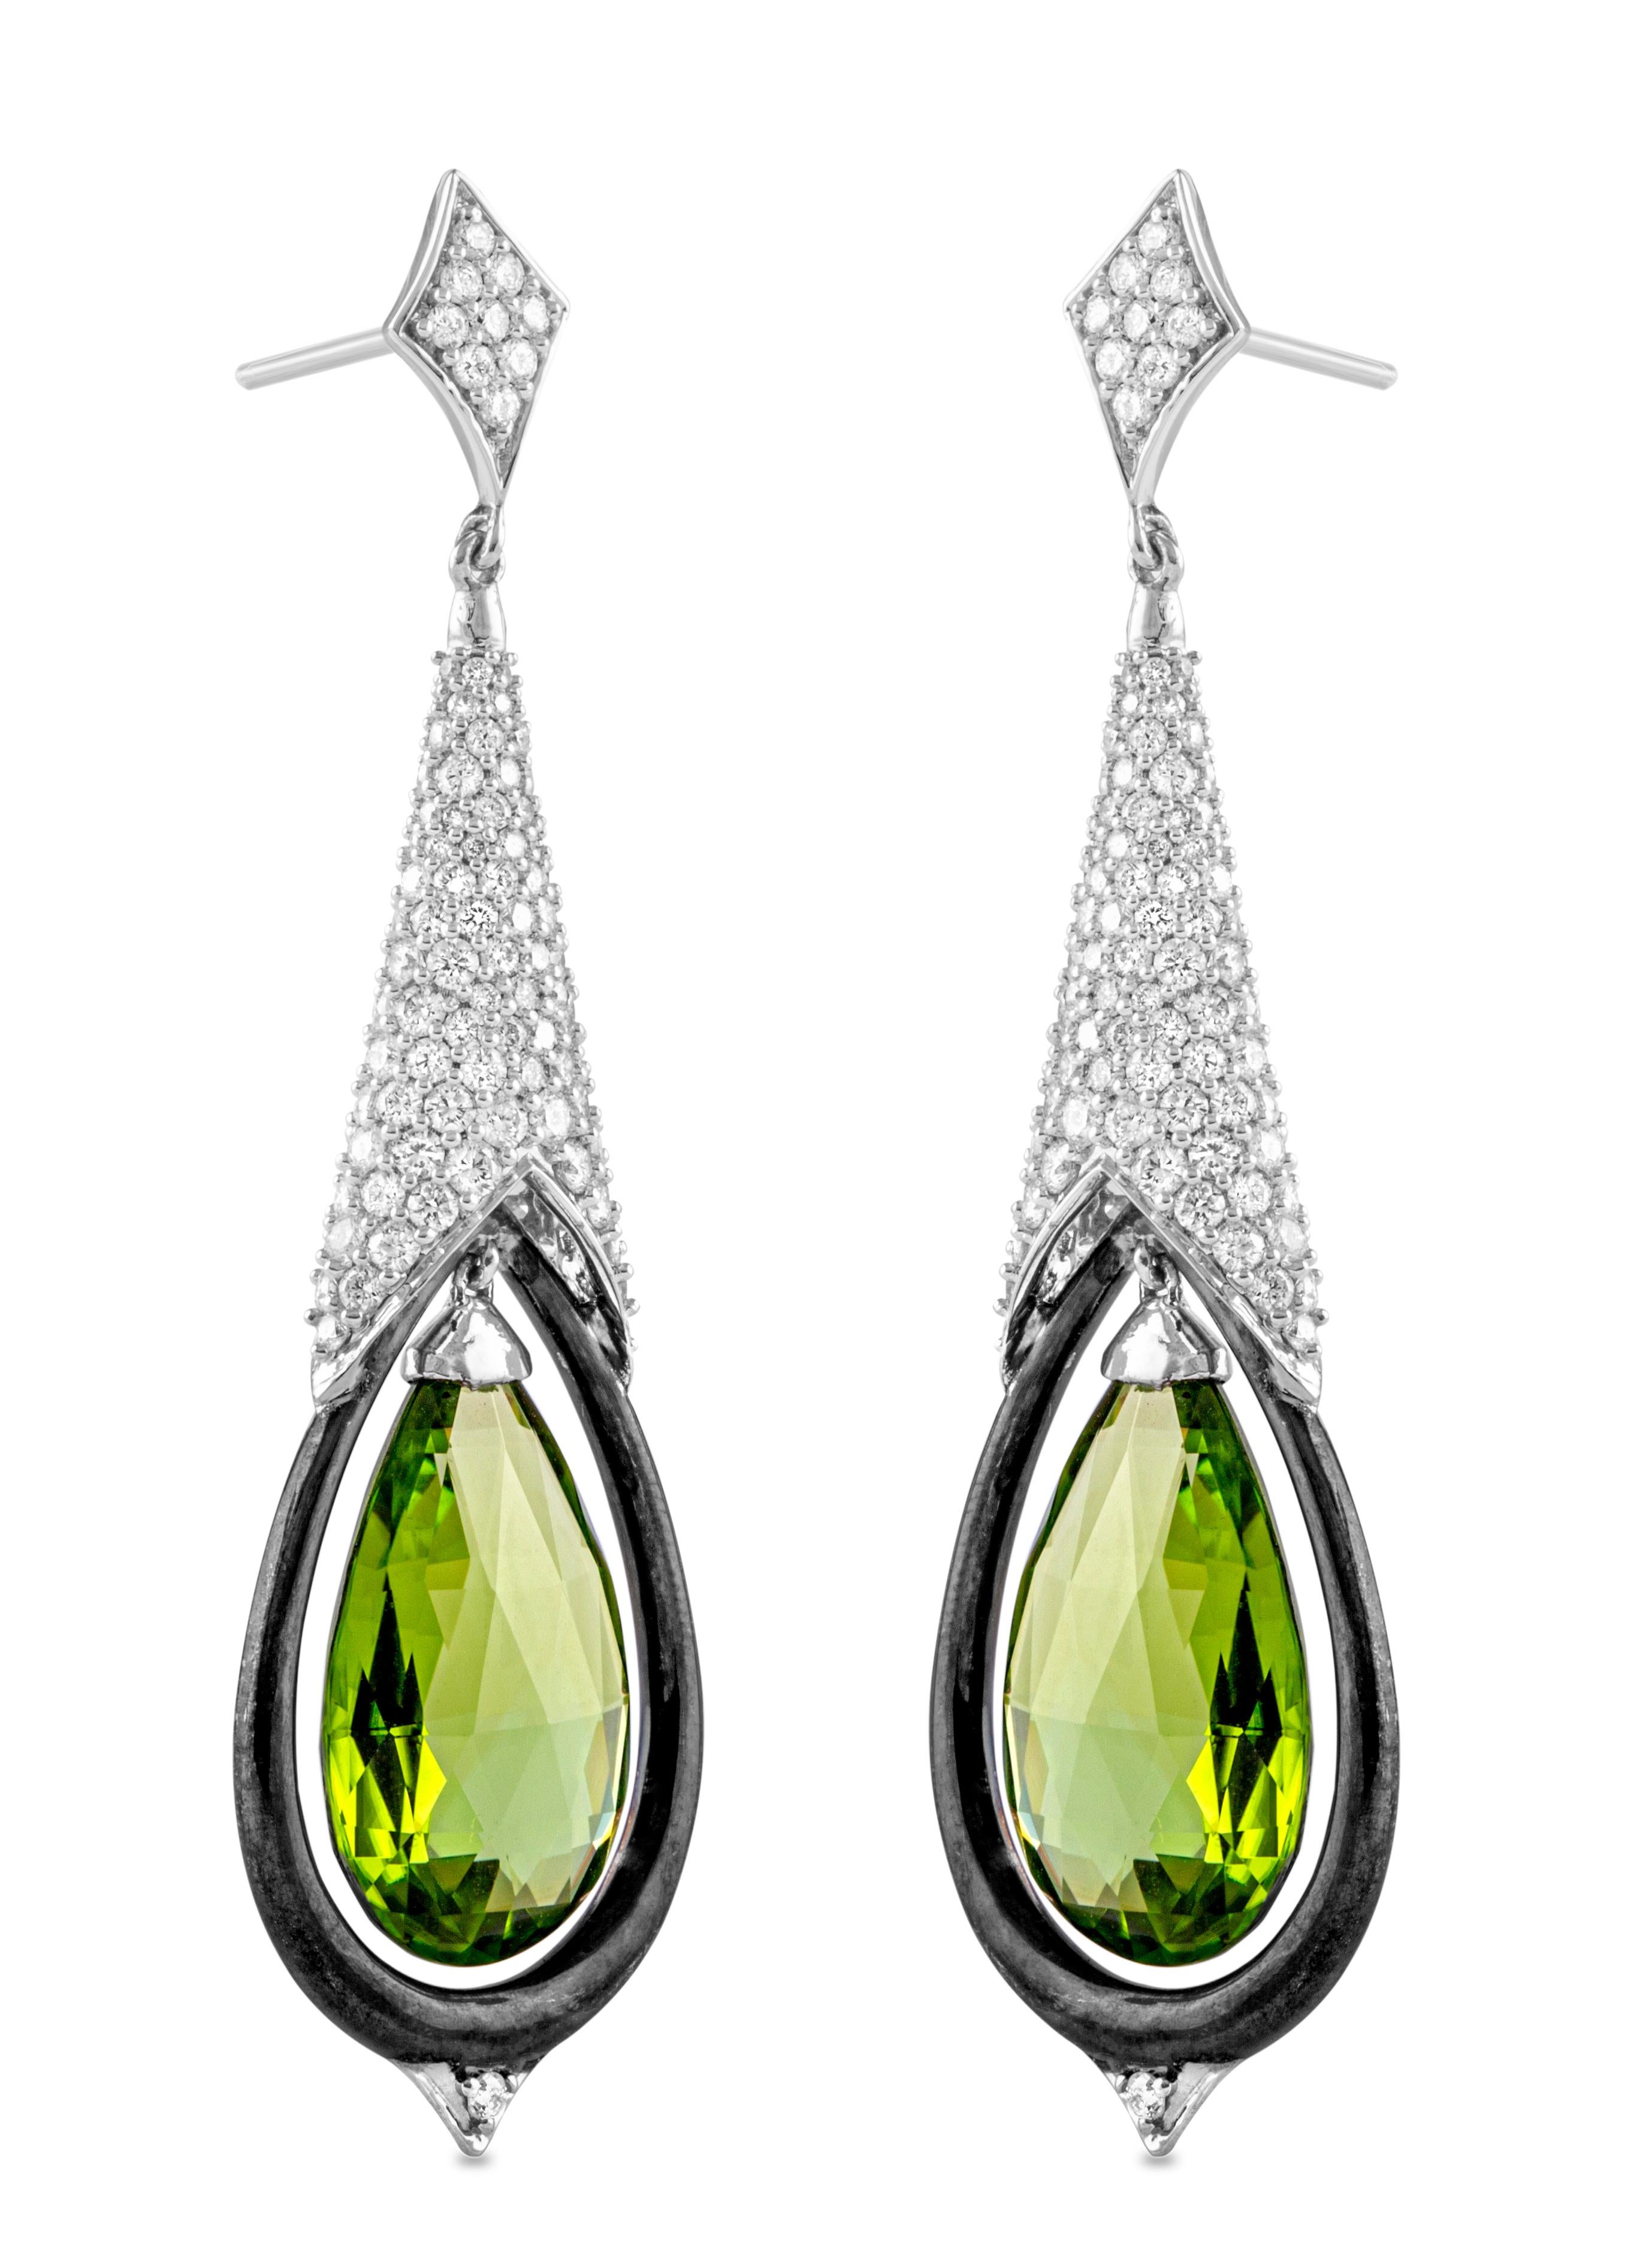 Peridot drops mysteriously float in these stunning diamond earrings in 18K white gold.

Given its colour and energetic properties, peridot is often considered a stone for opening the heart, as well as for attracting abundance, family harmony and